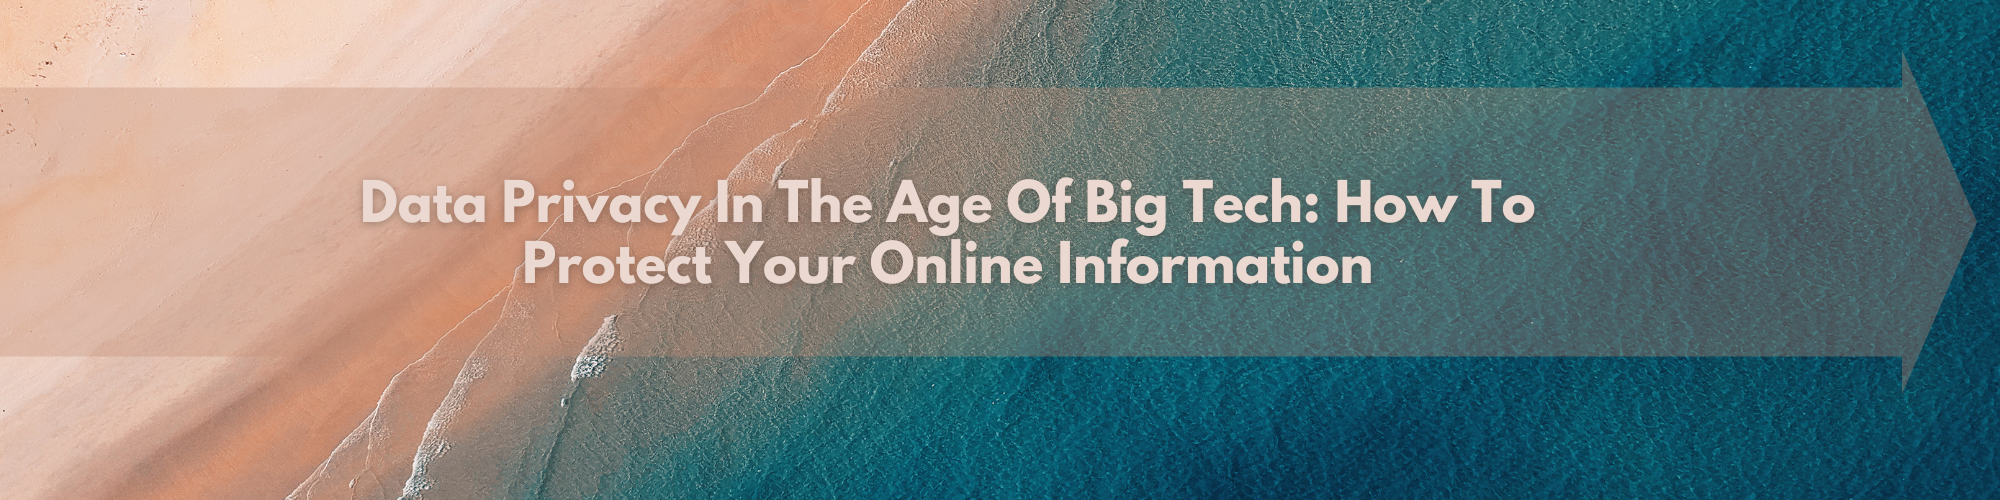 Data Privacy in the Age of Big Tech: How to protect your online information